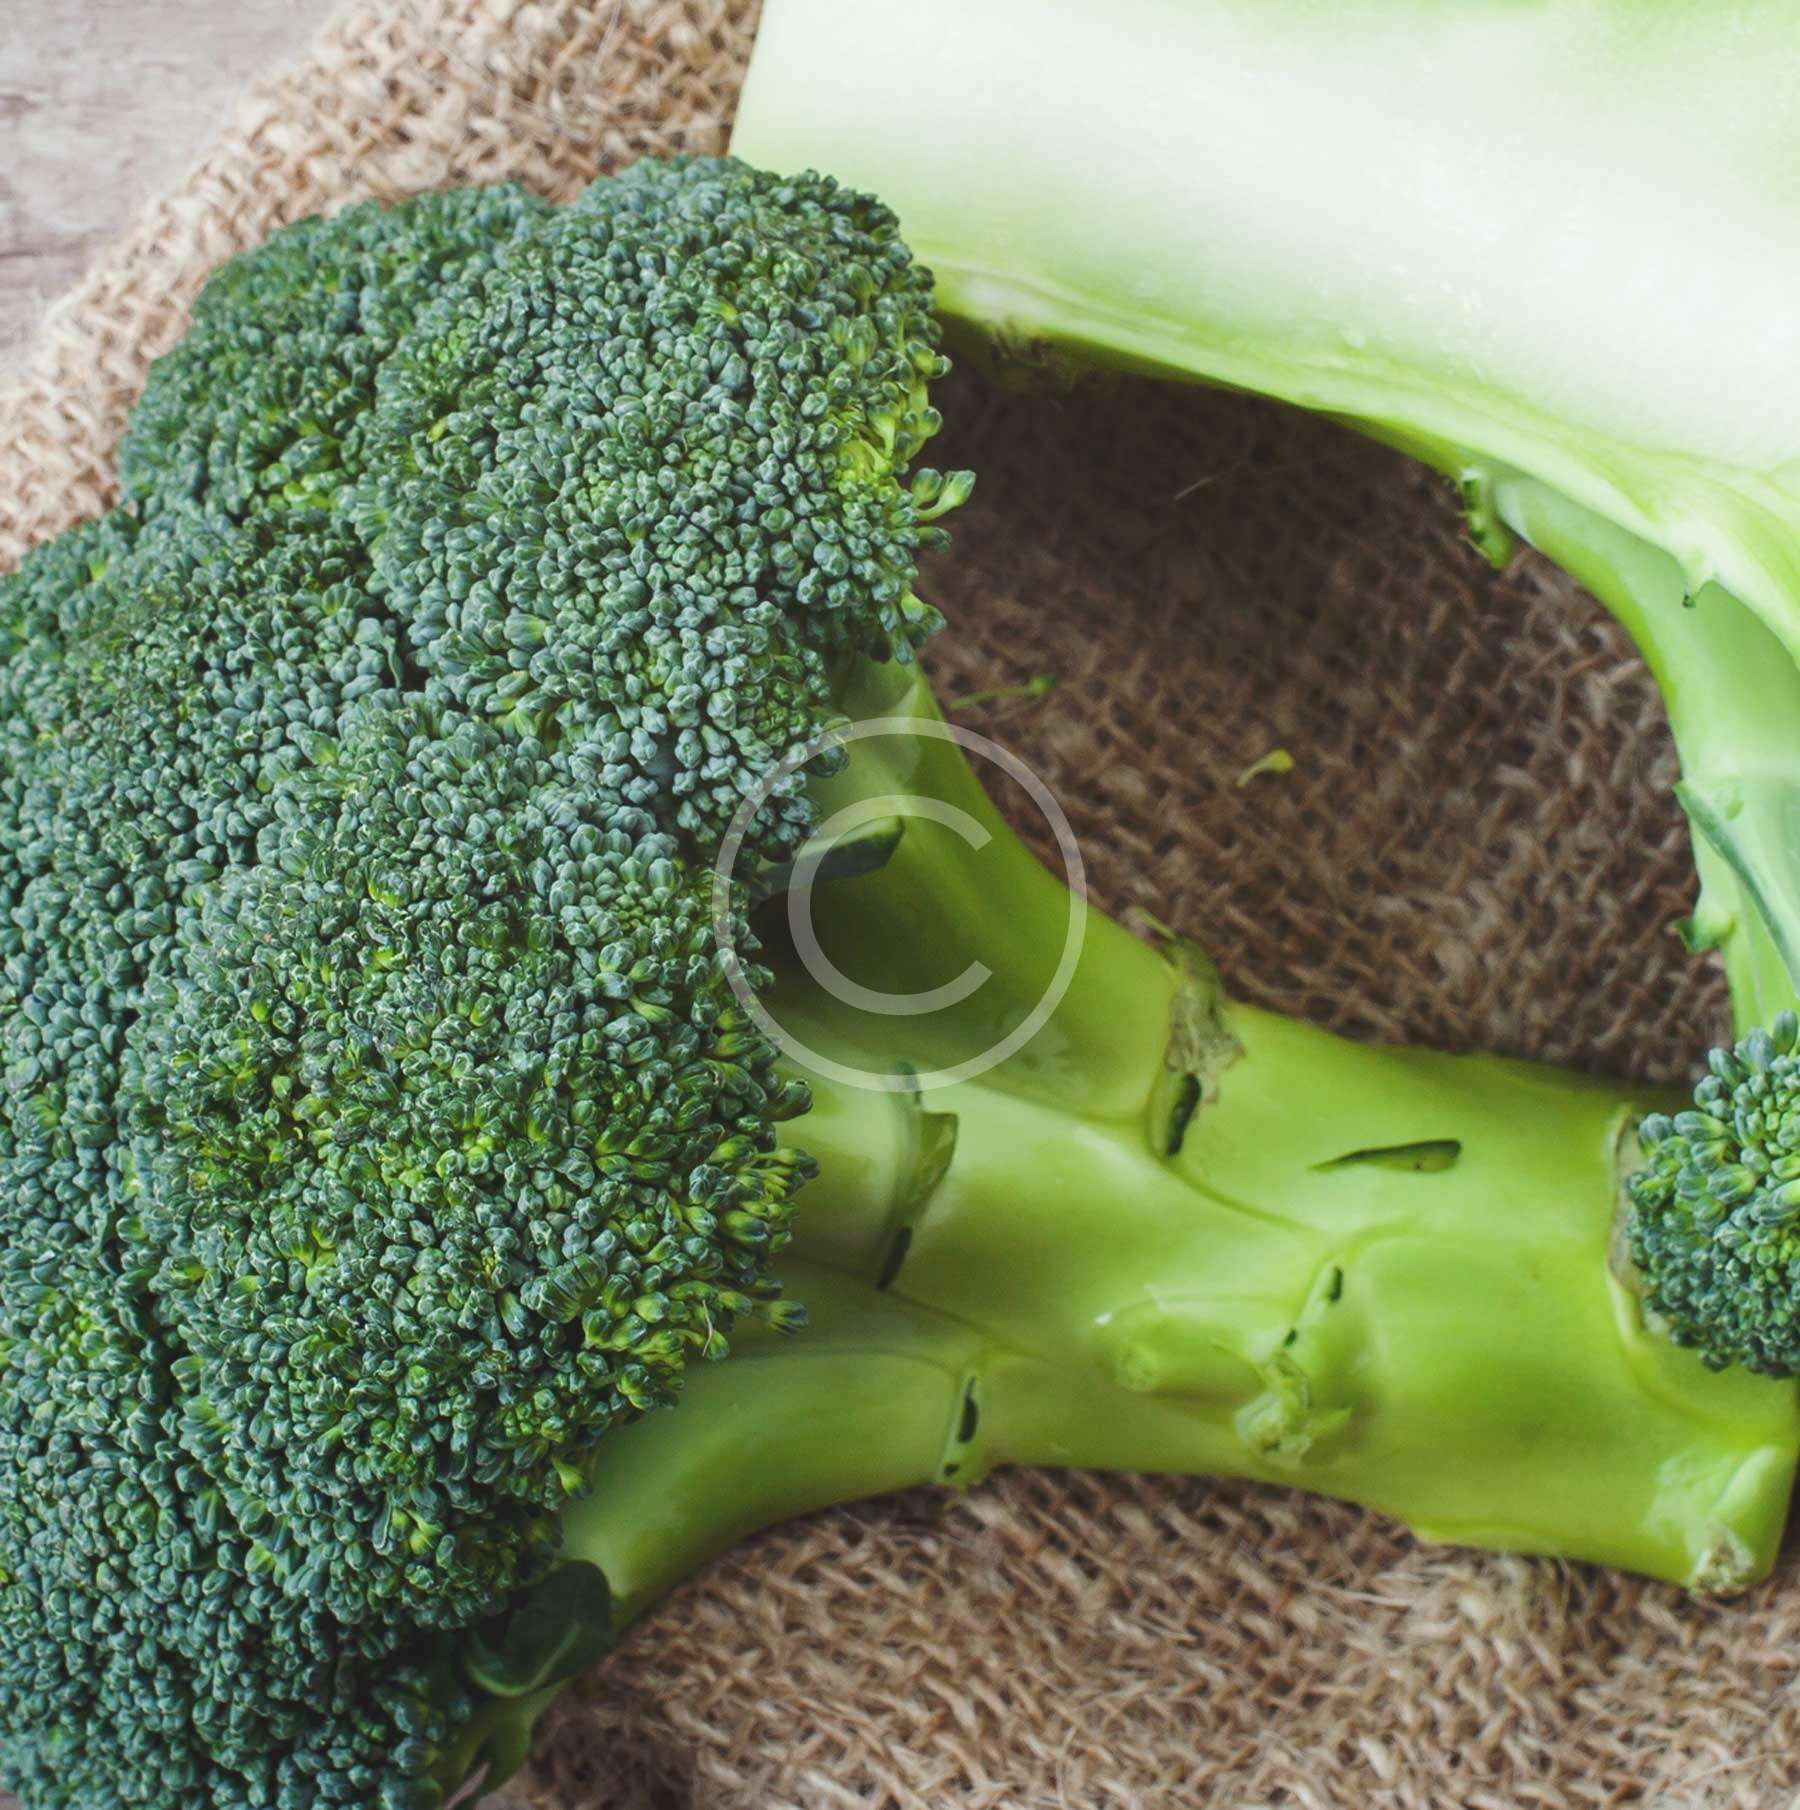 Broccoli is king, no matter what the weather is